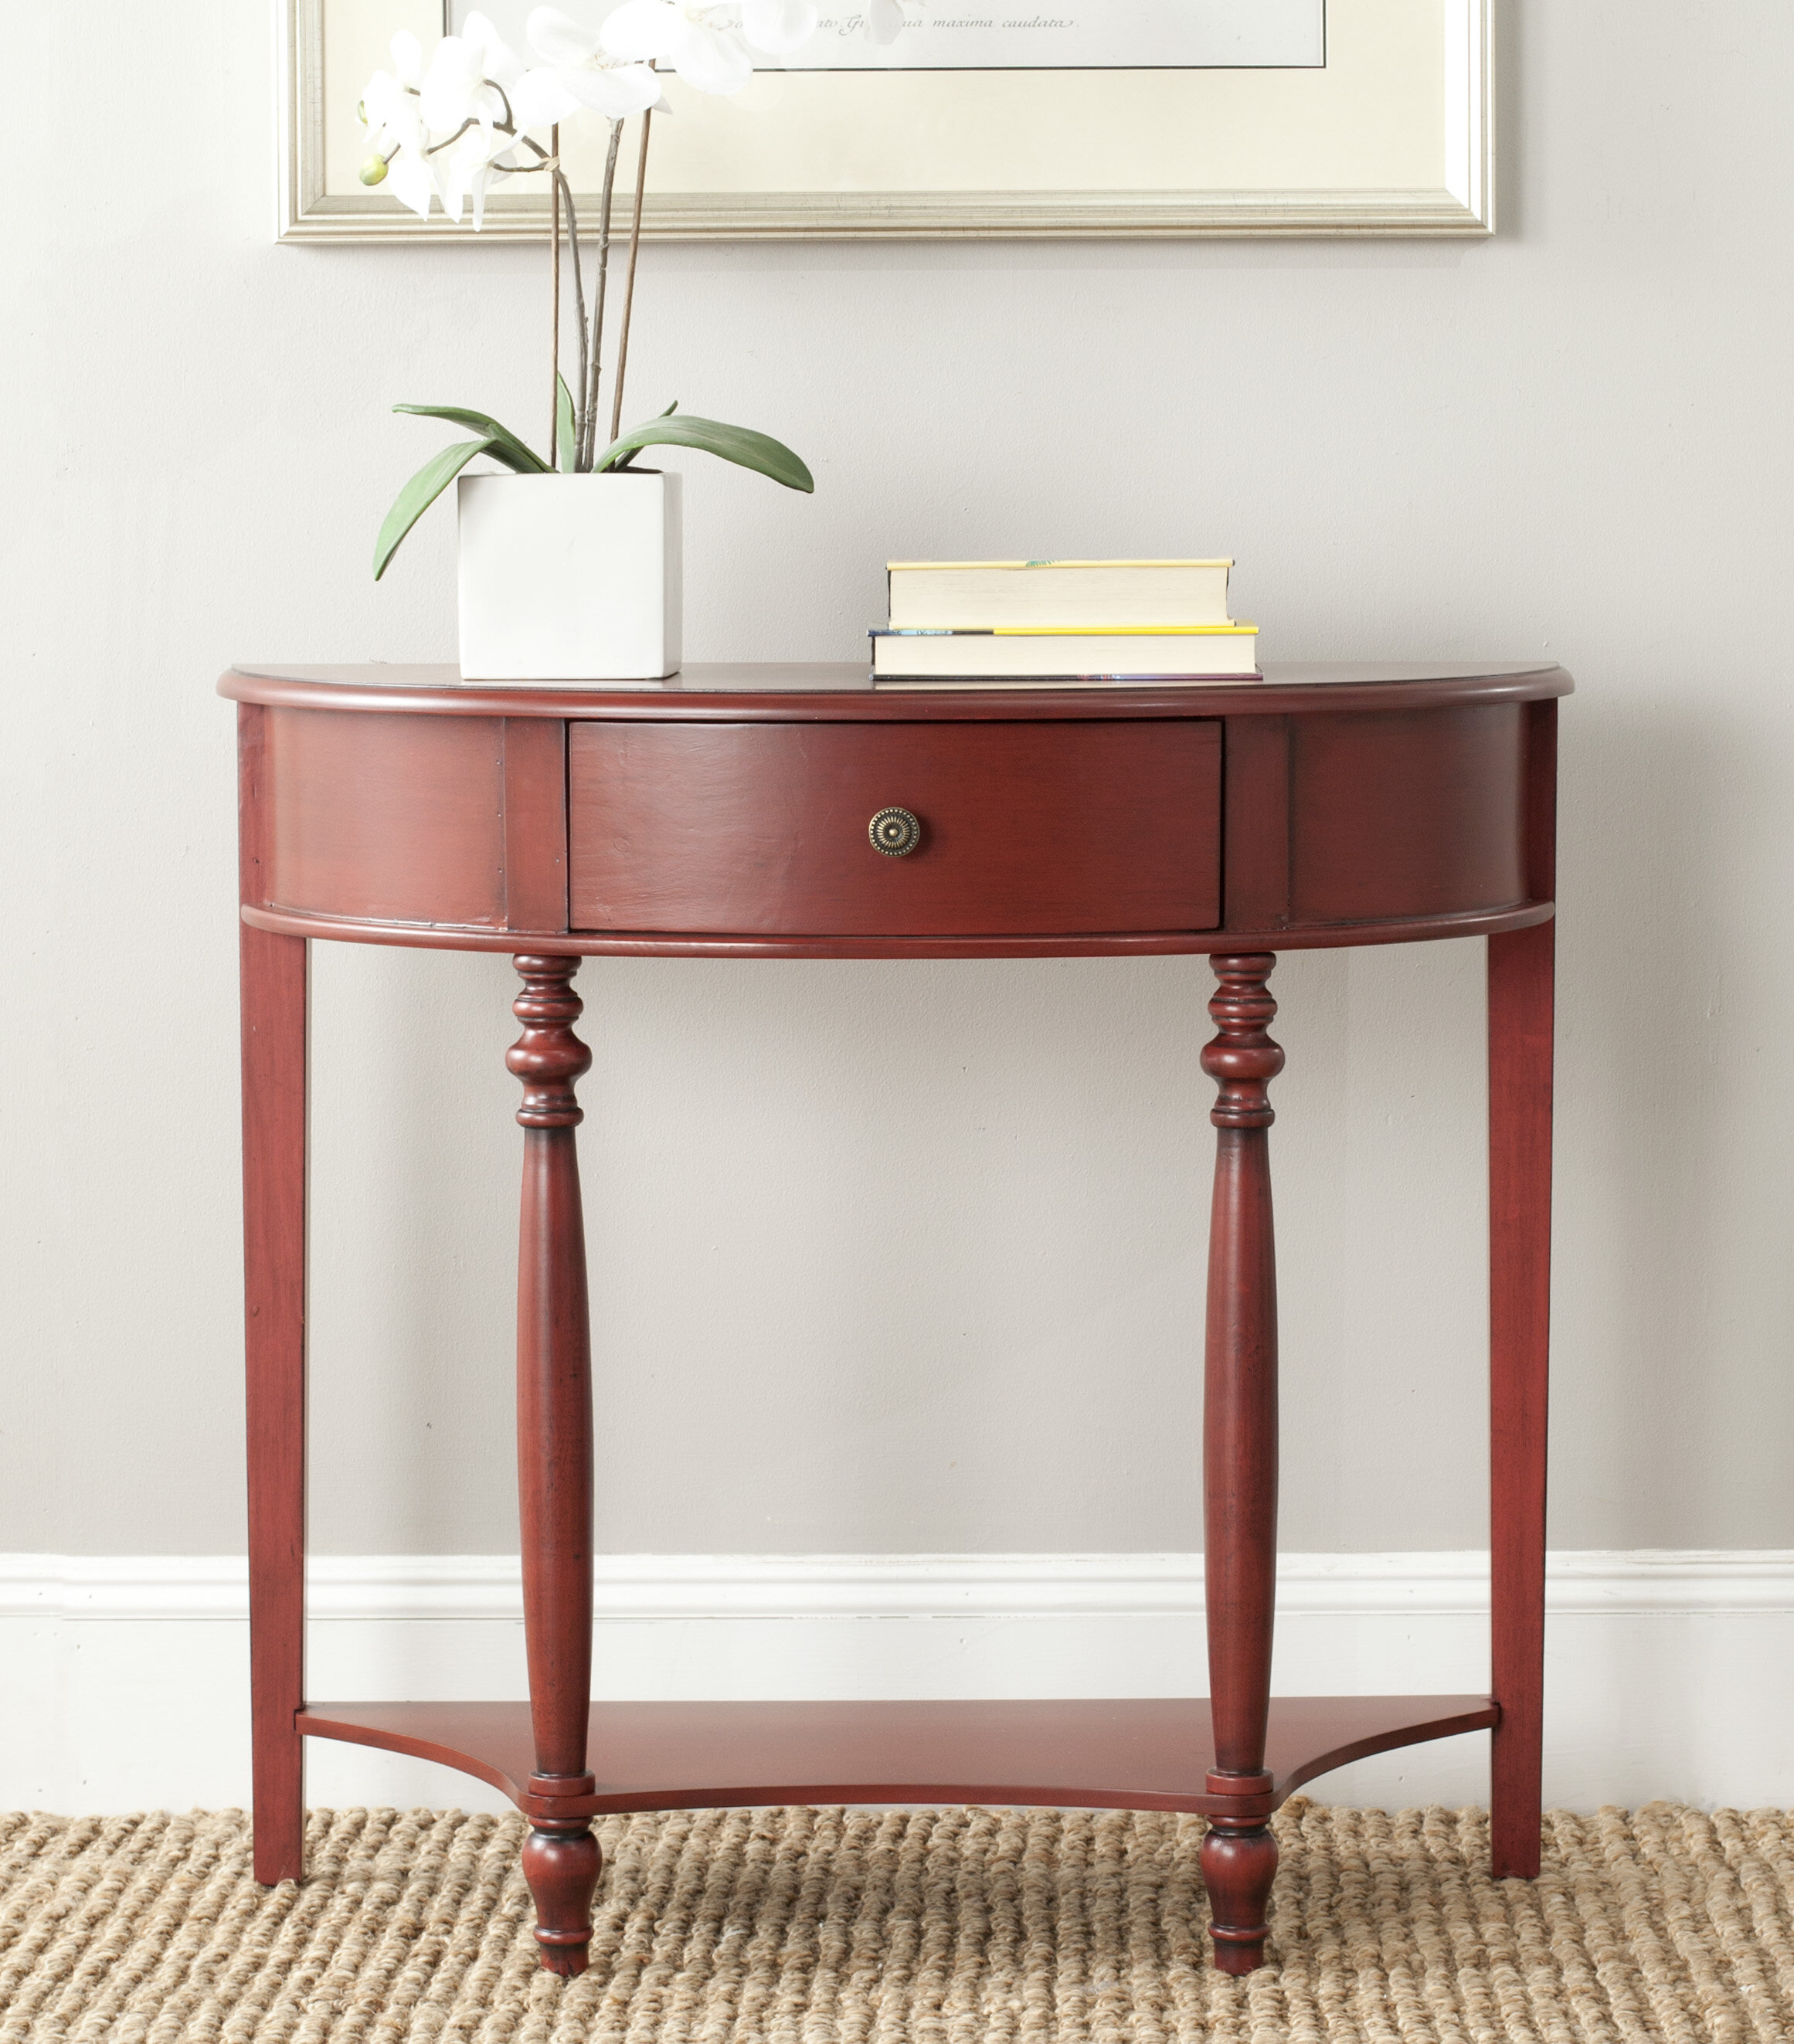 Kingery 34 Solid Wood Console Table Reviews Birch Lane